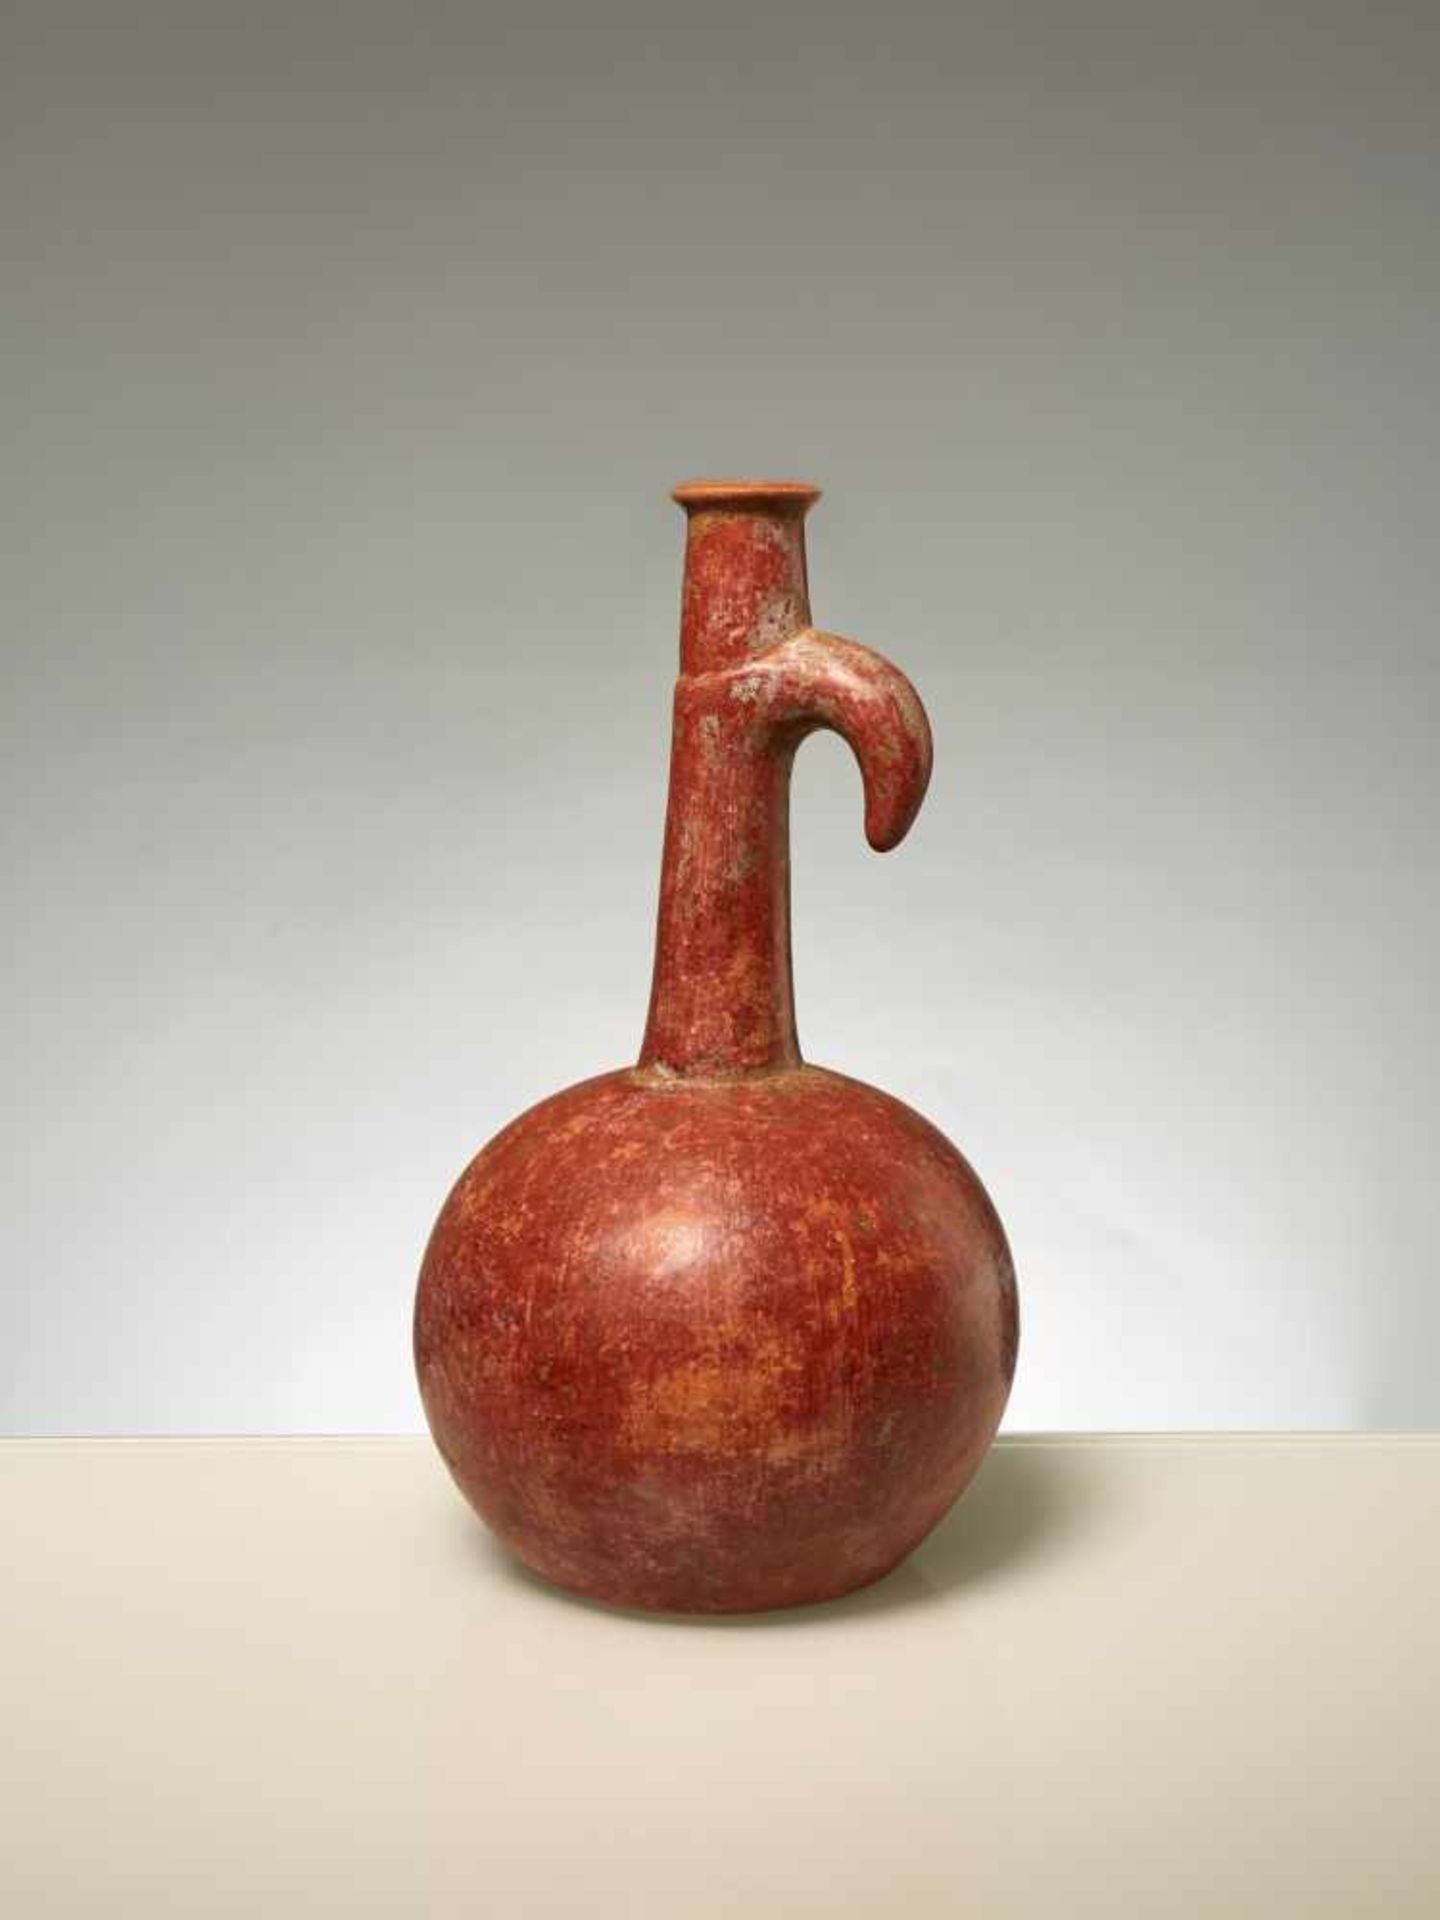 LONG VESSEL WITH BEAK - CHAVIN CULTURE, PERU, C. 500 BCRed painted fired clayChavin culture, Peru, - Image 2 of 3